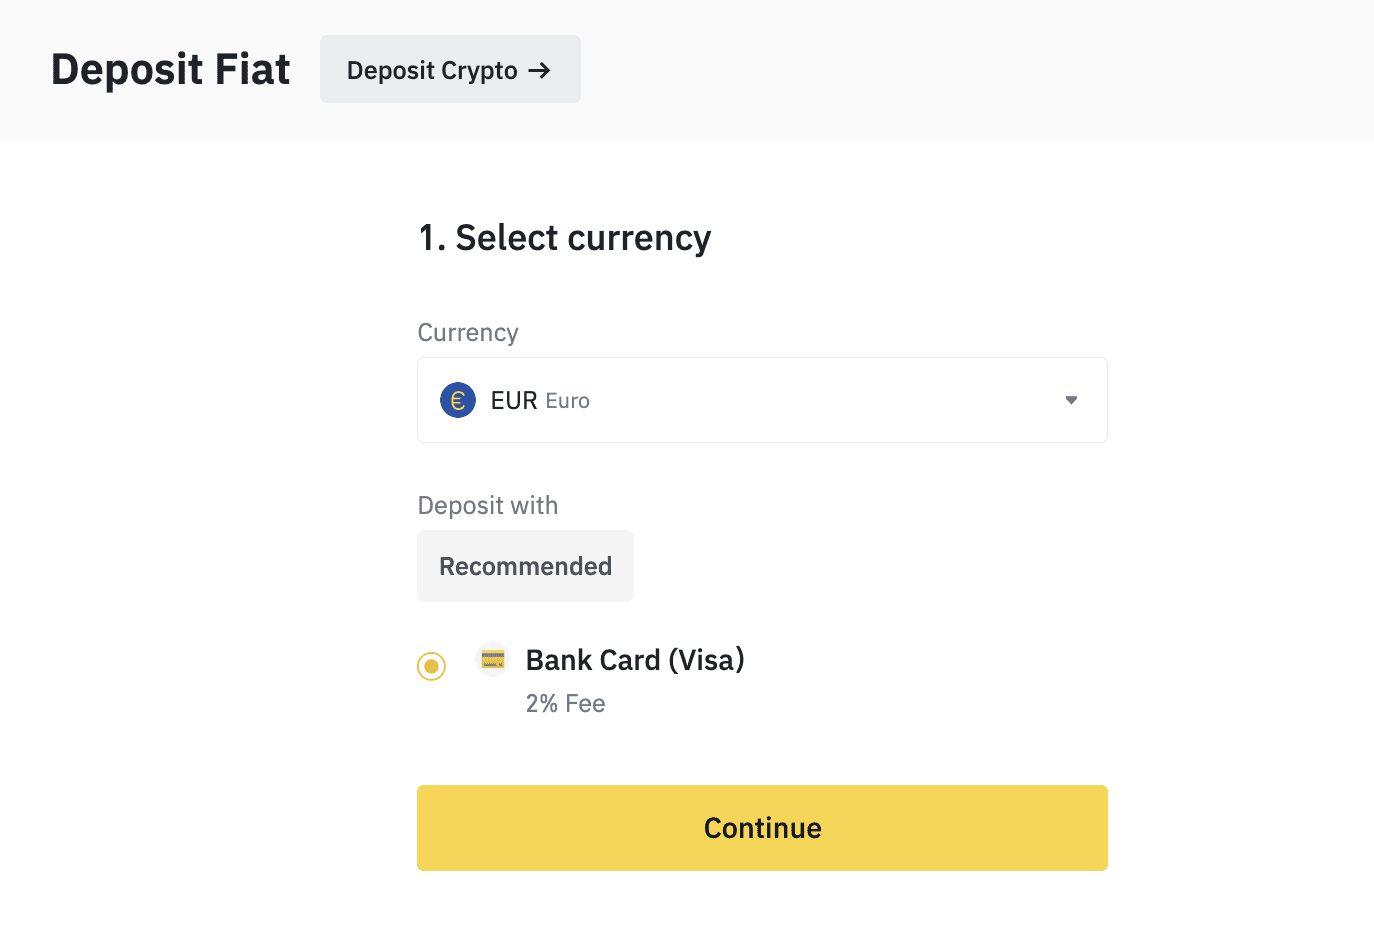 How-to Deposit Fiat to Crypto (using Binance) | Vent Help Center